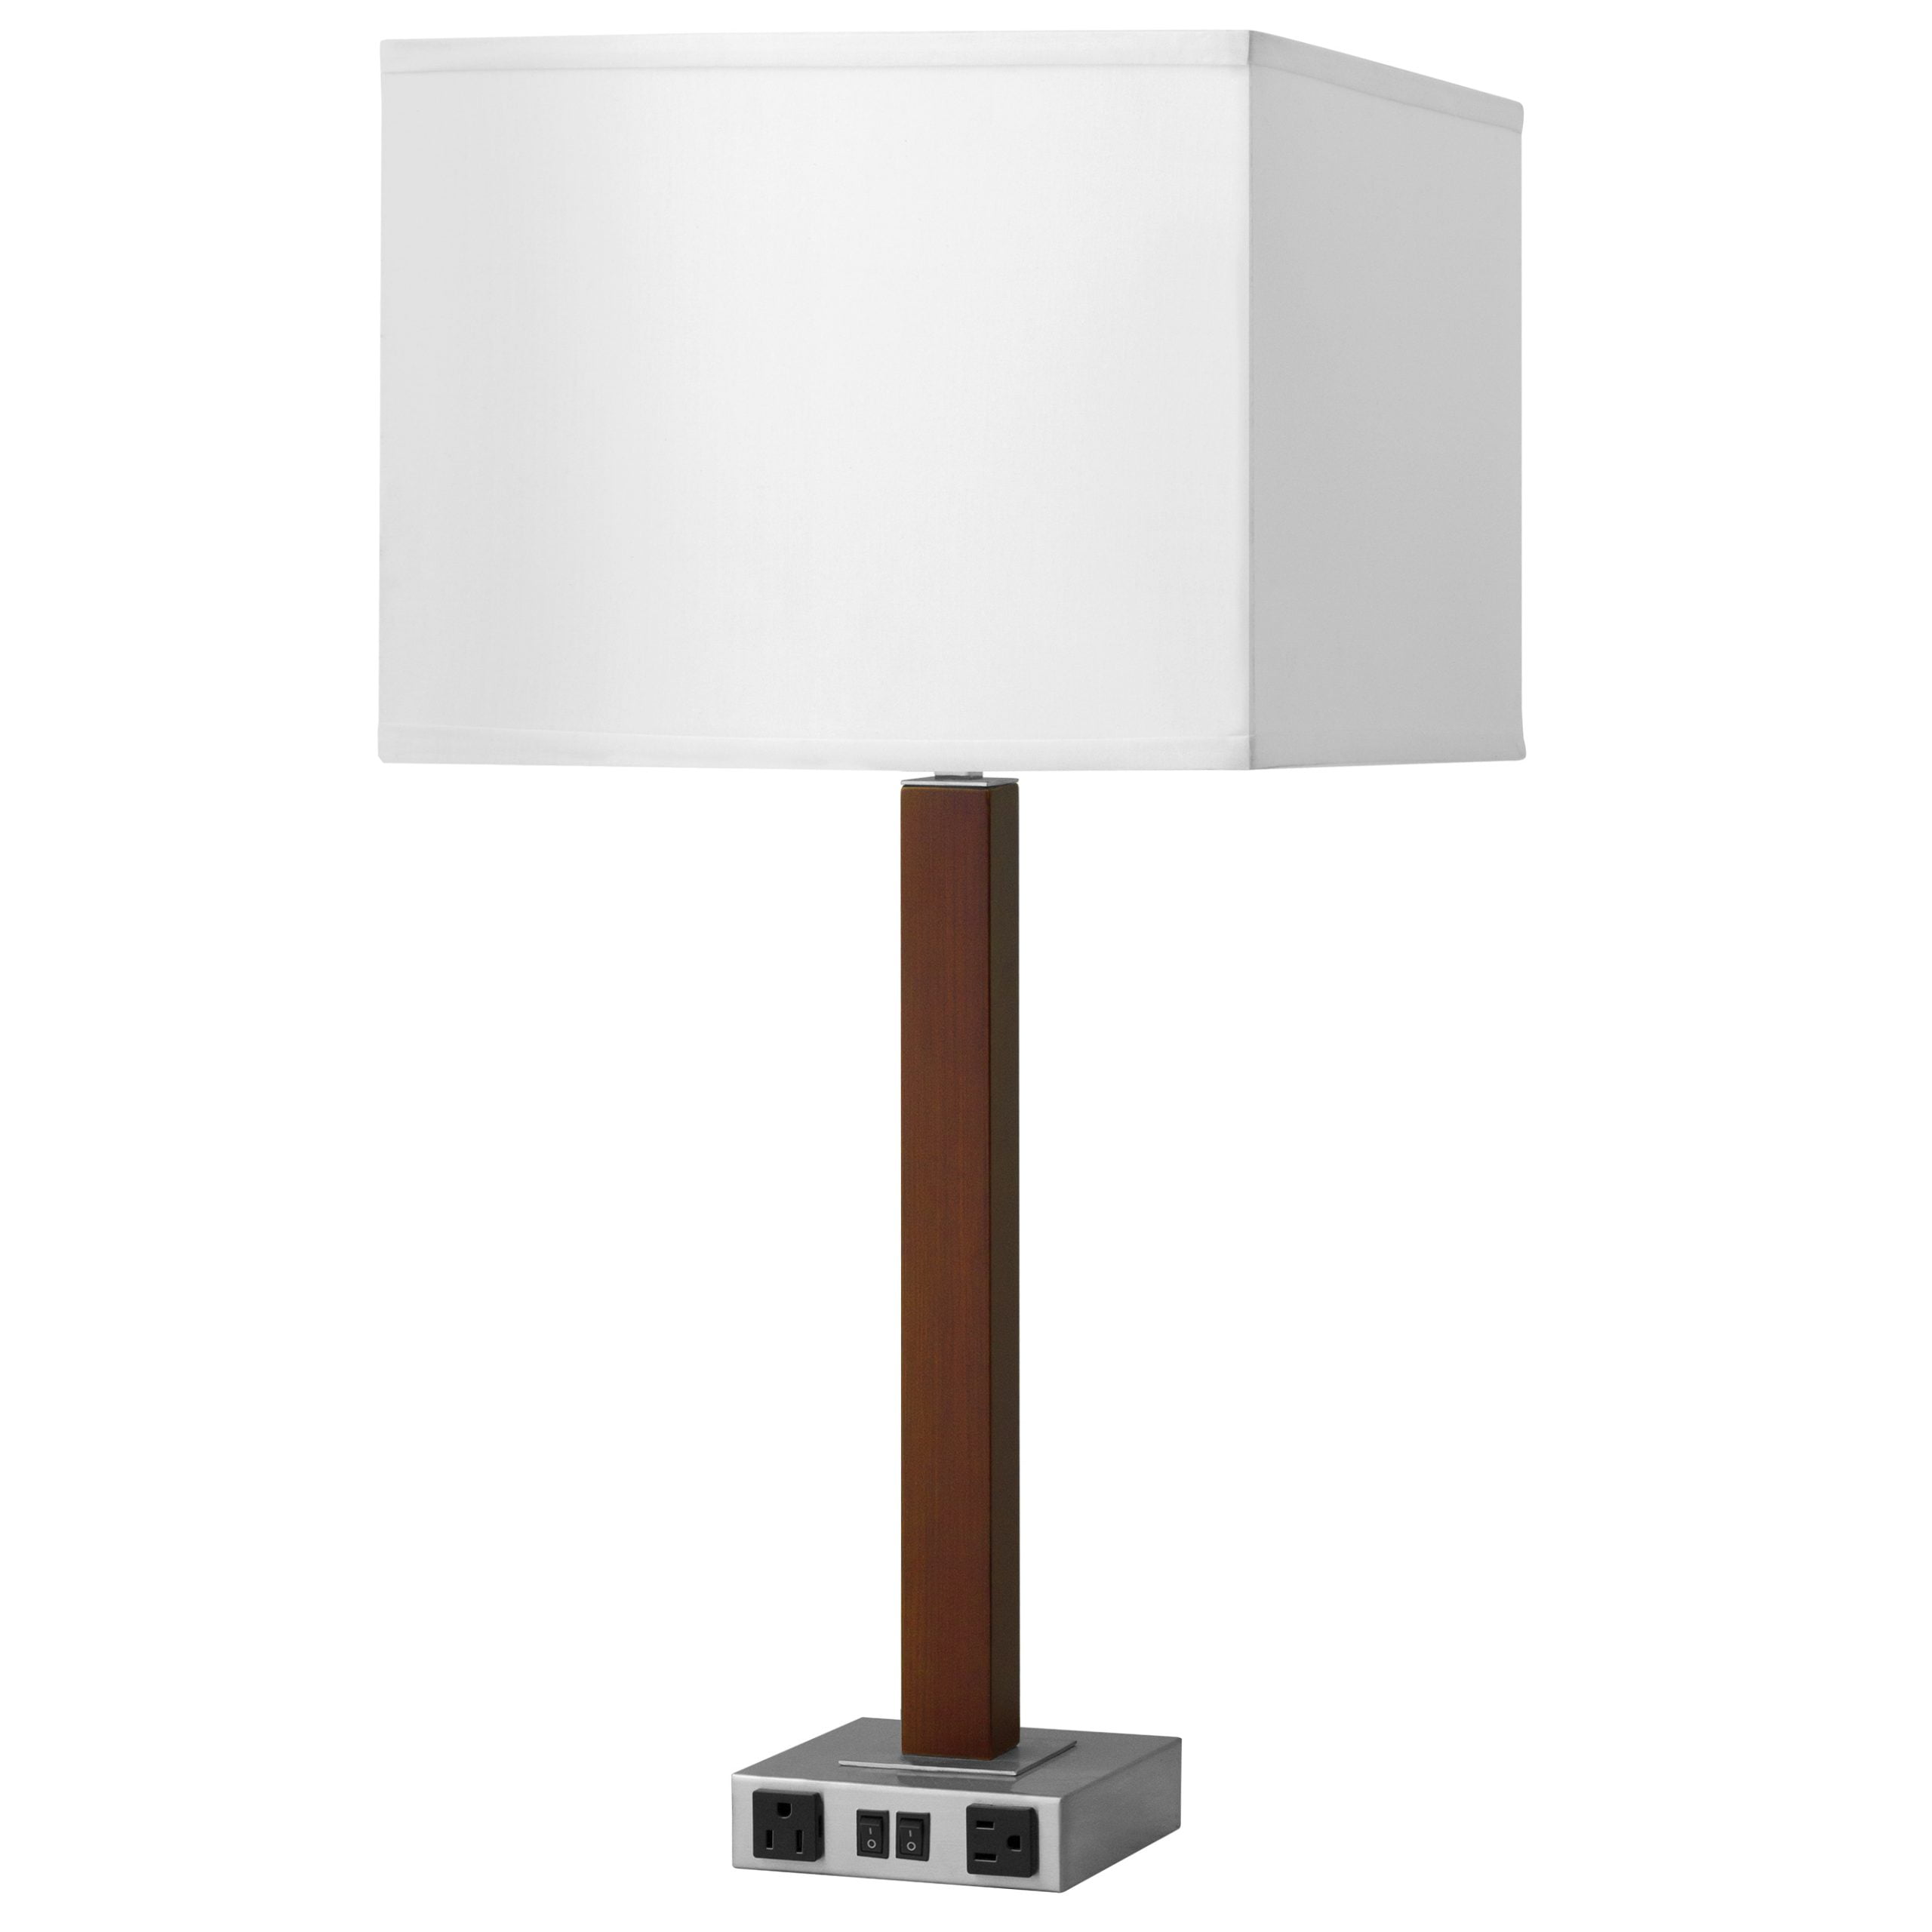 Calibri Twin Table Lamp with 2 Outlets